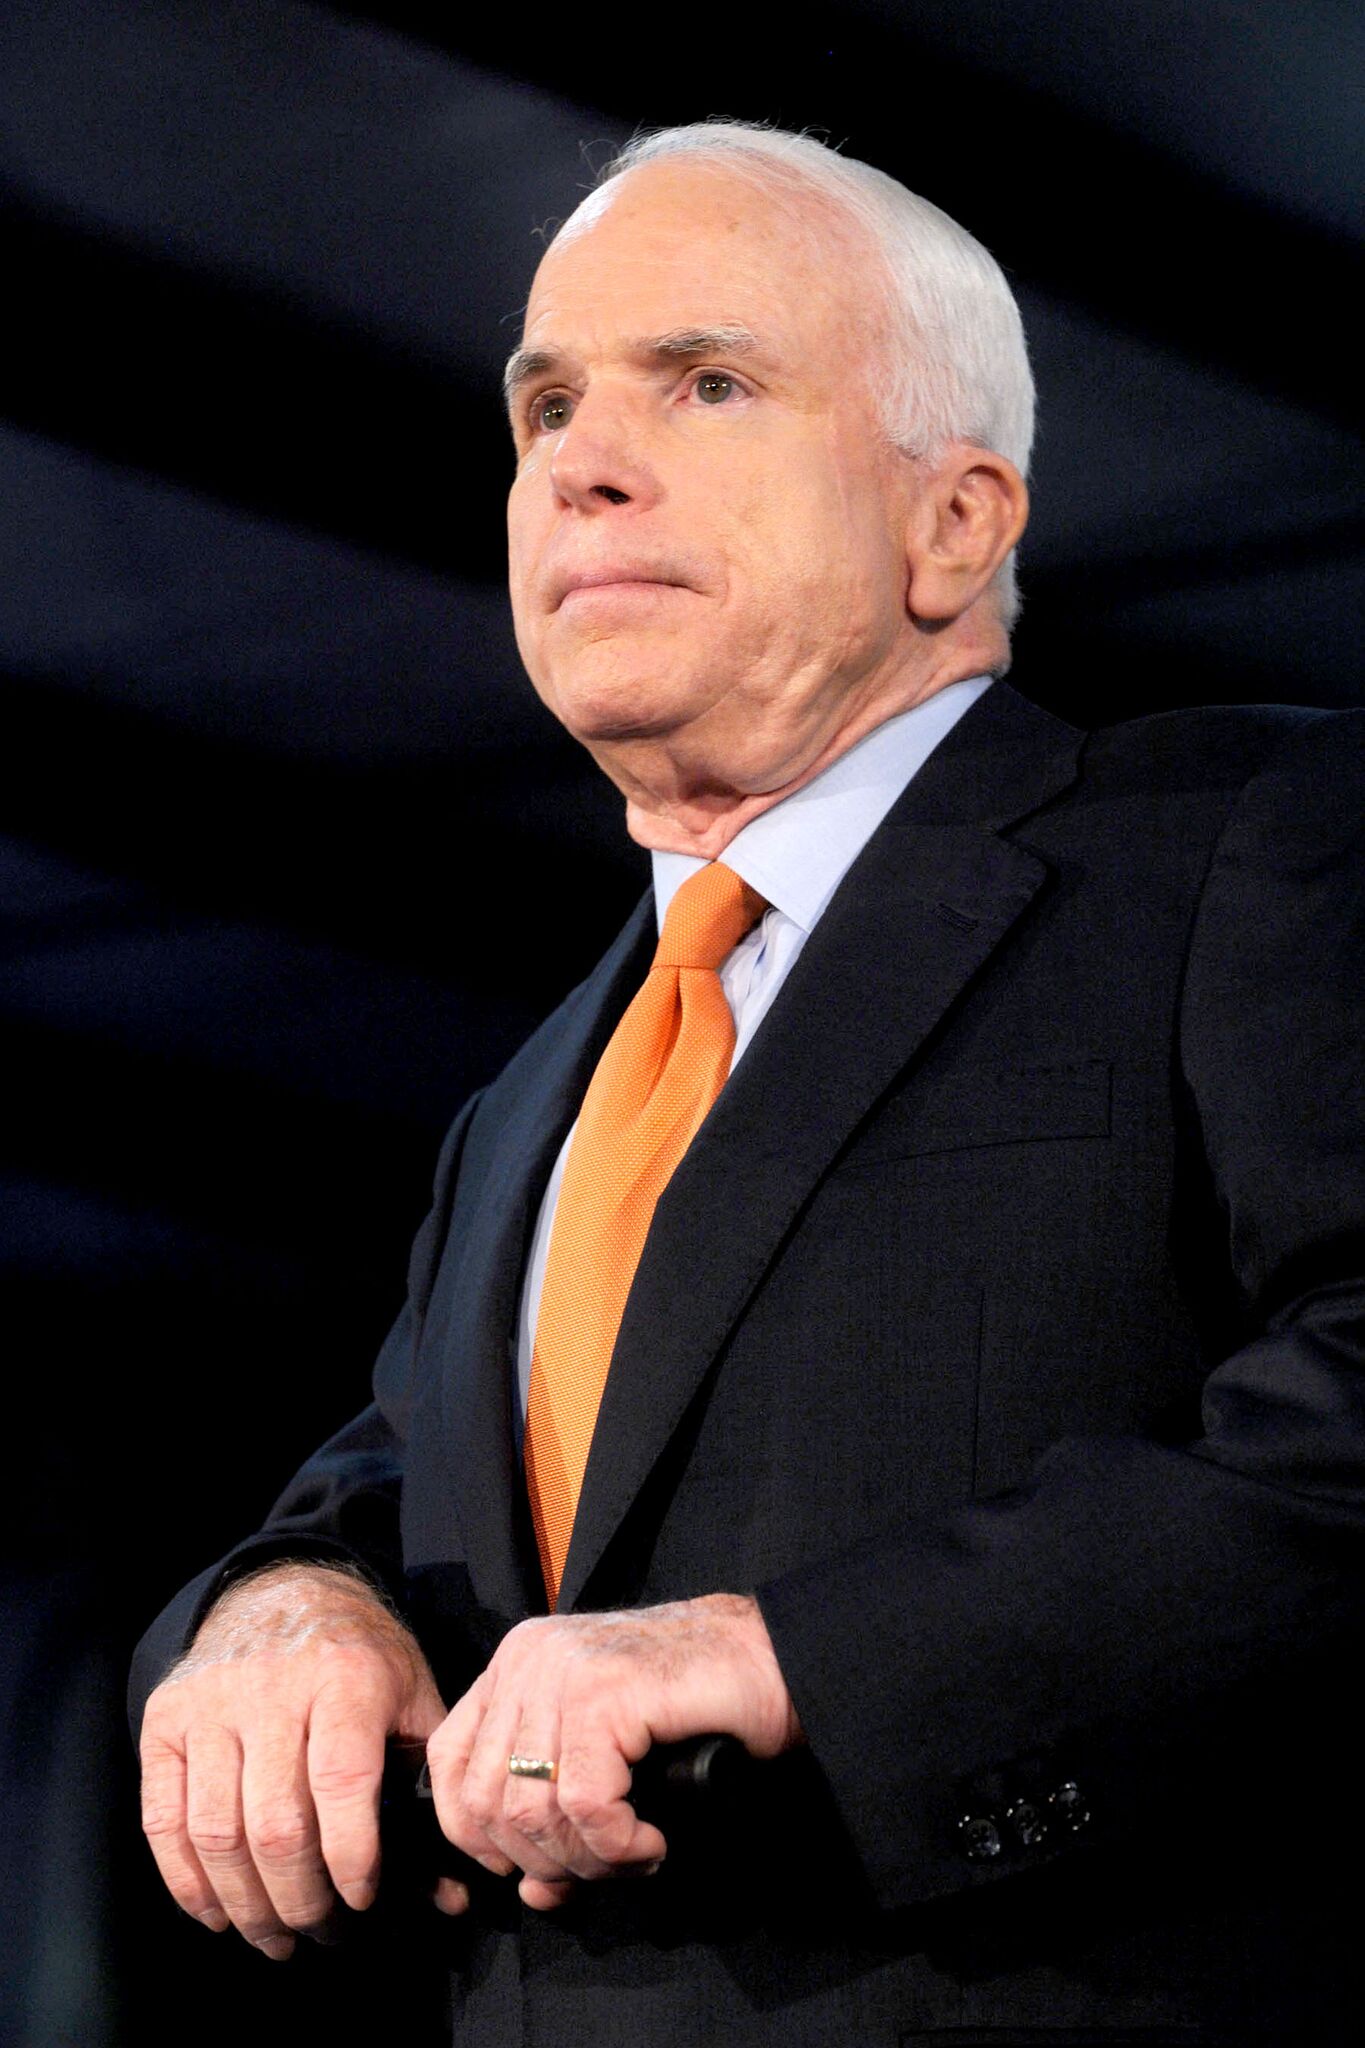 John McCain at an opening of a town hall meeting campaign event in Pipersville, Pennsylvania | Getty Images